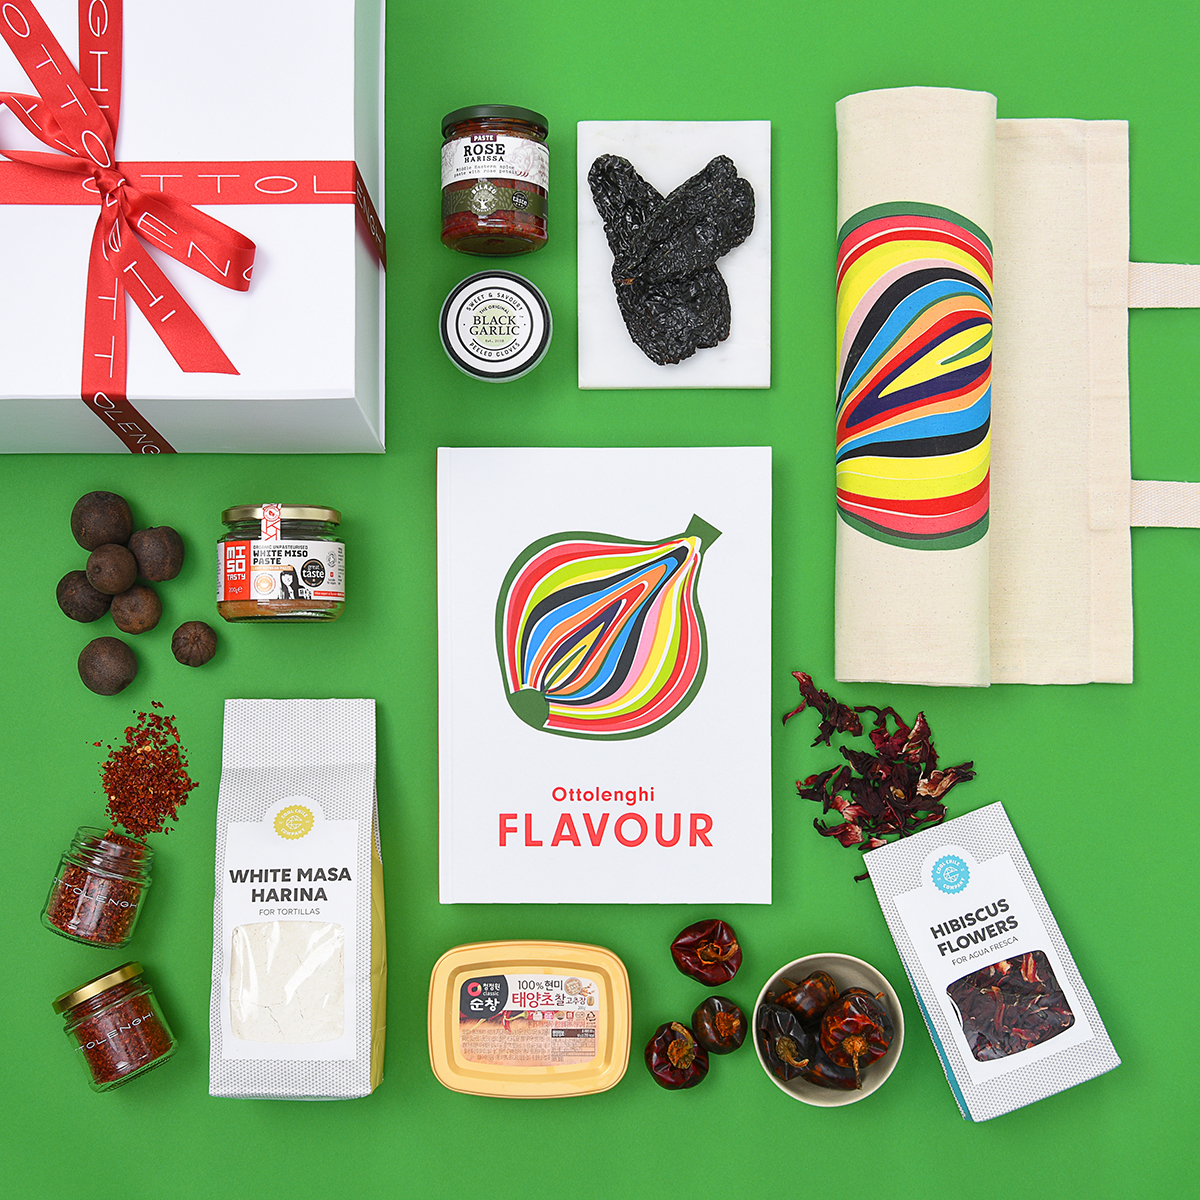 Ottolenghi's new book Flavour if available with an accompanying hamper of ingredients